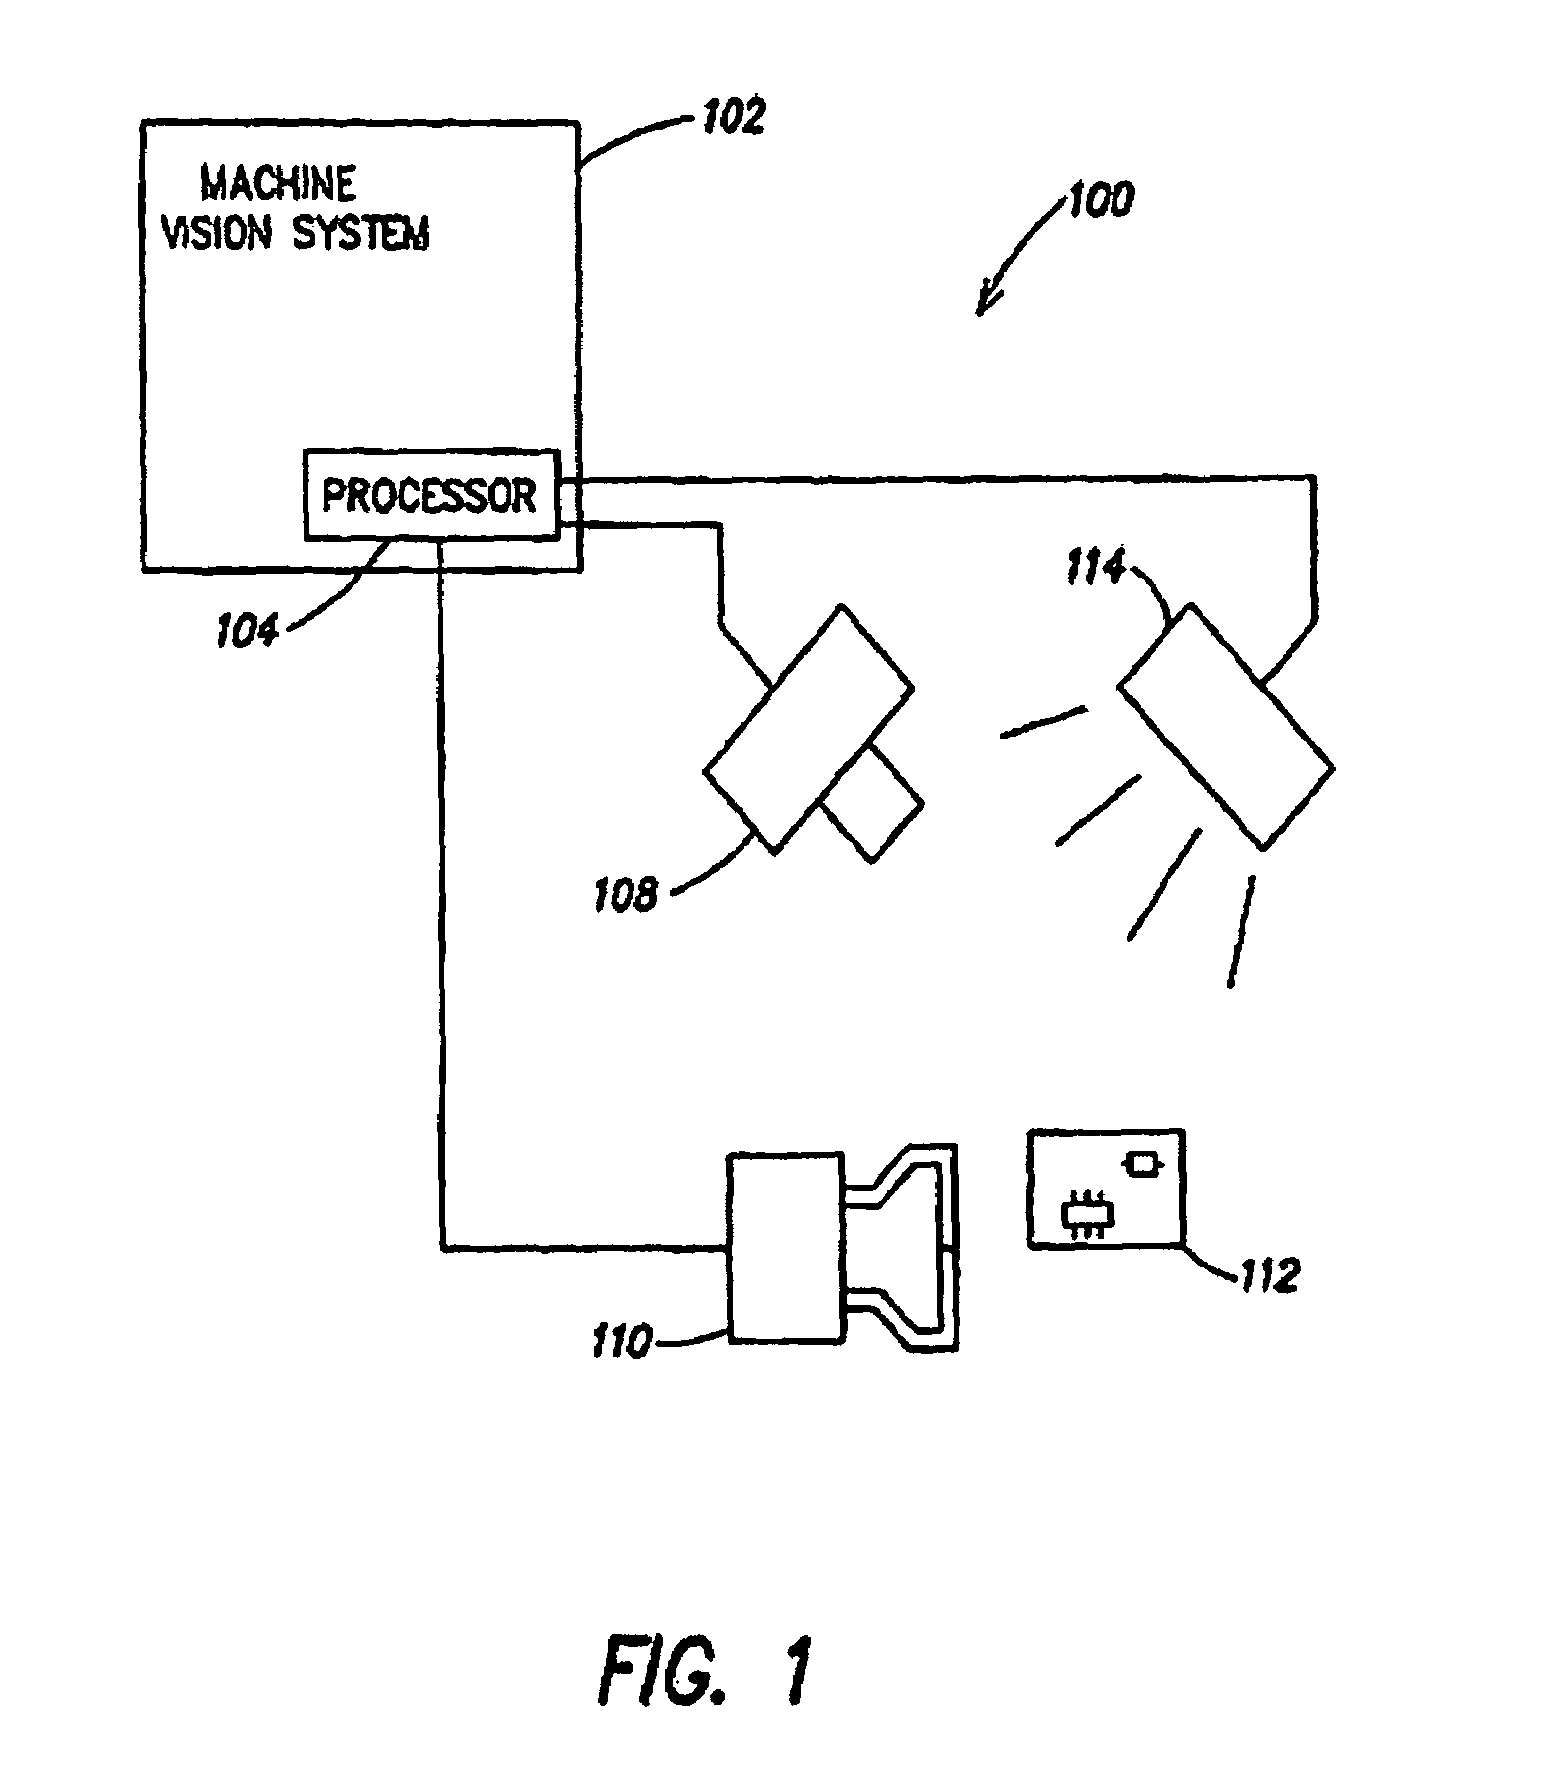 Systems and methods for providing illumination in machine vision systems